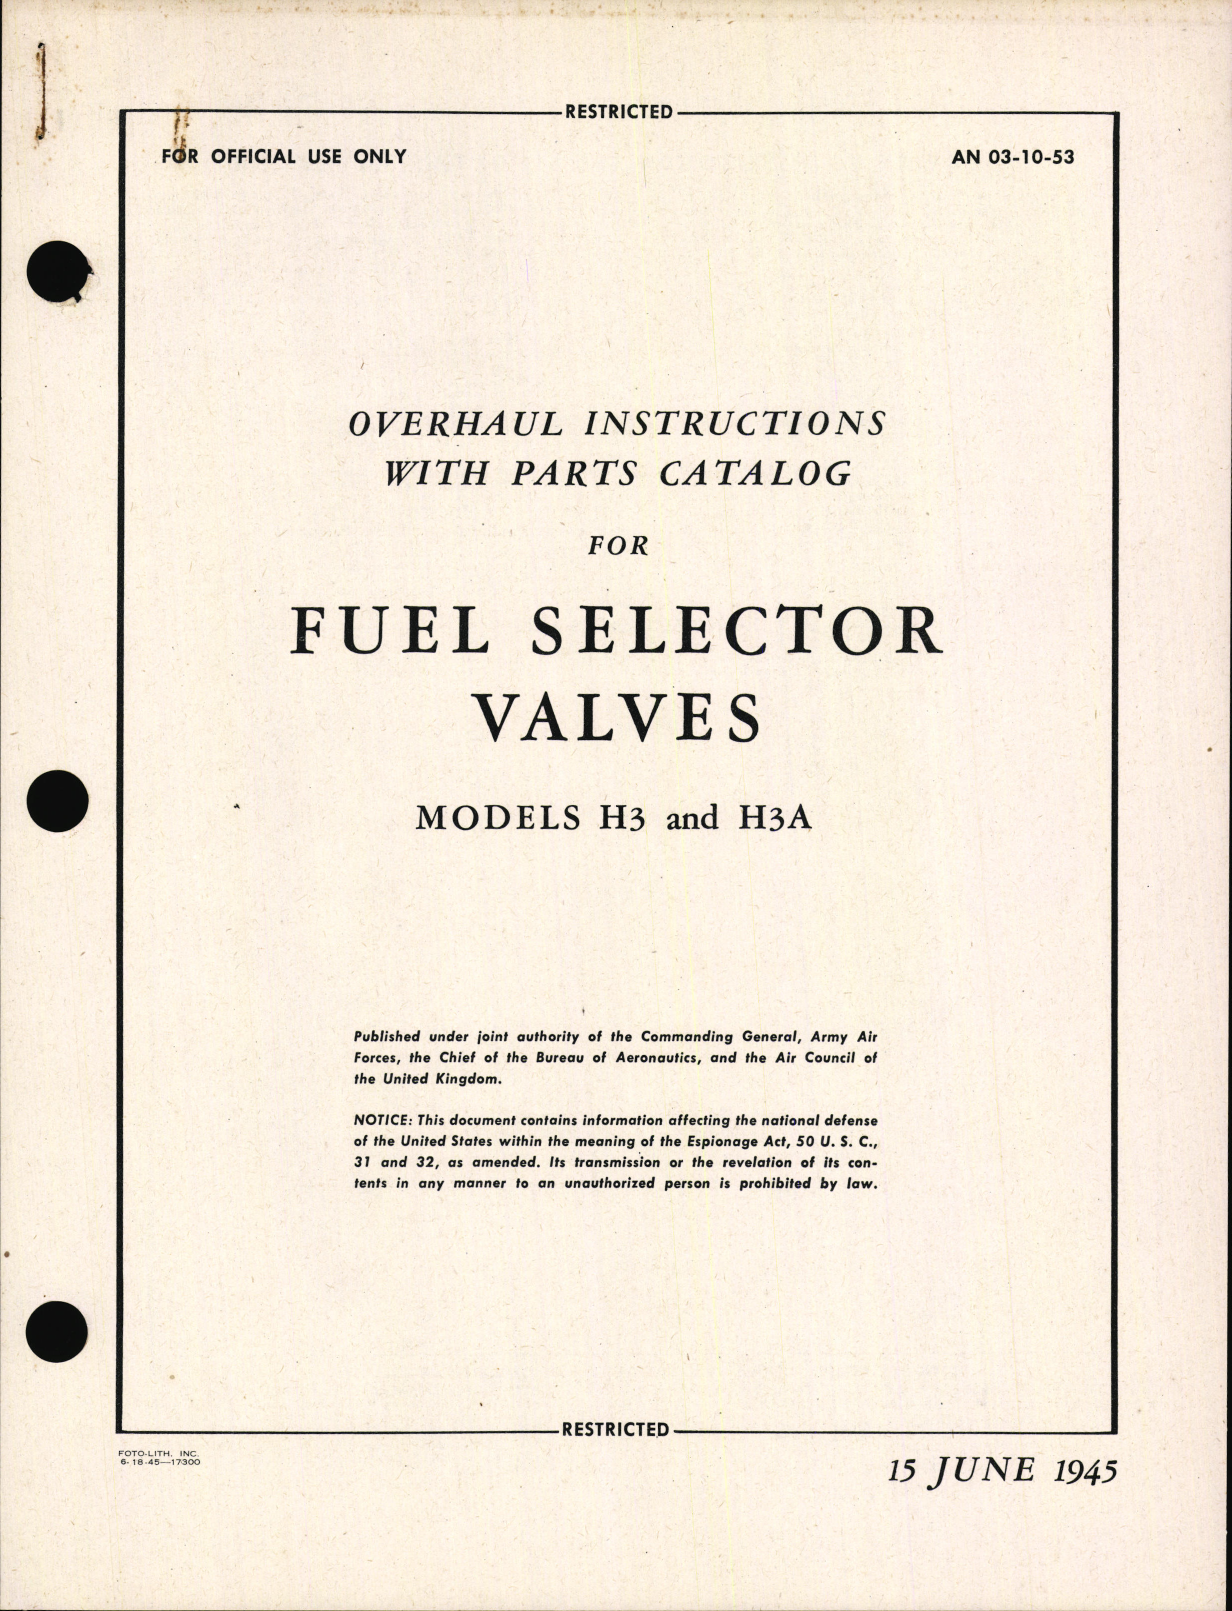 Sample page 1 from AirCorps Library document: Overhaul Instructions with Parts Catalog for Fuel Selector Valves Models H3 and H3A